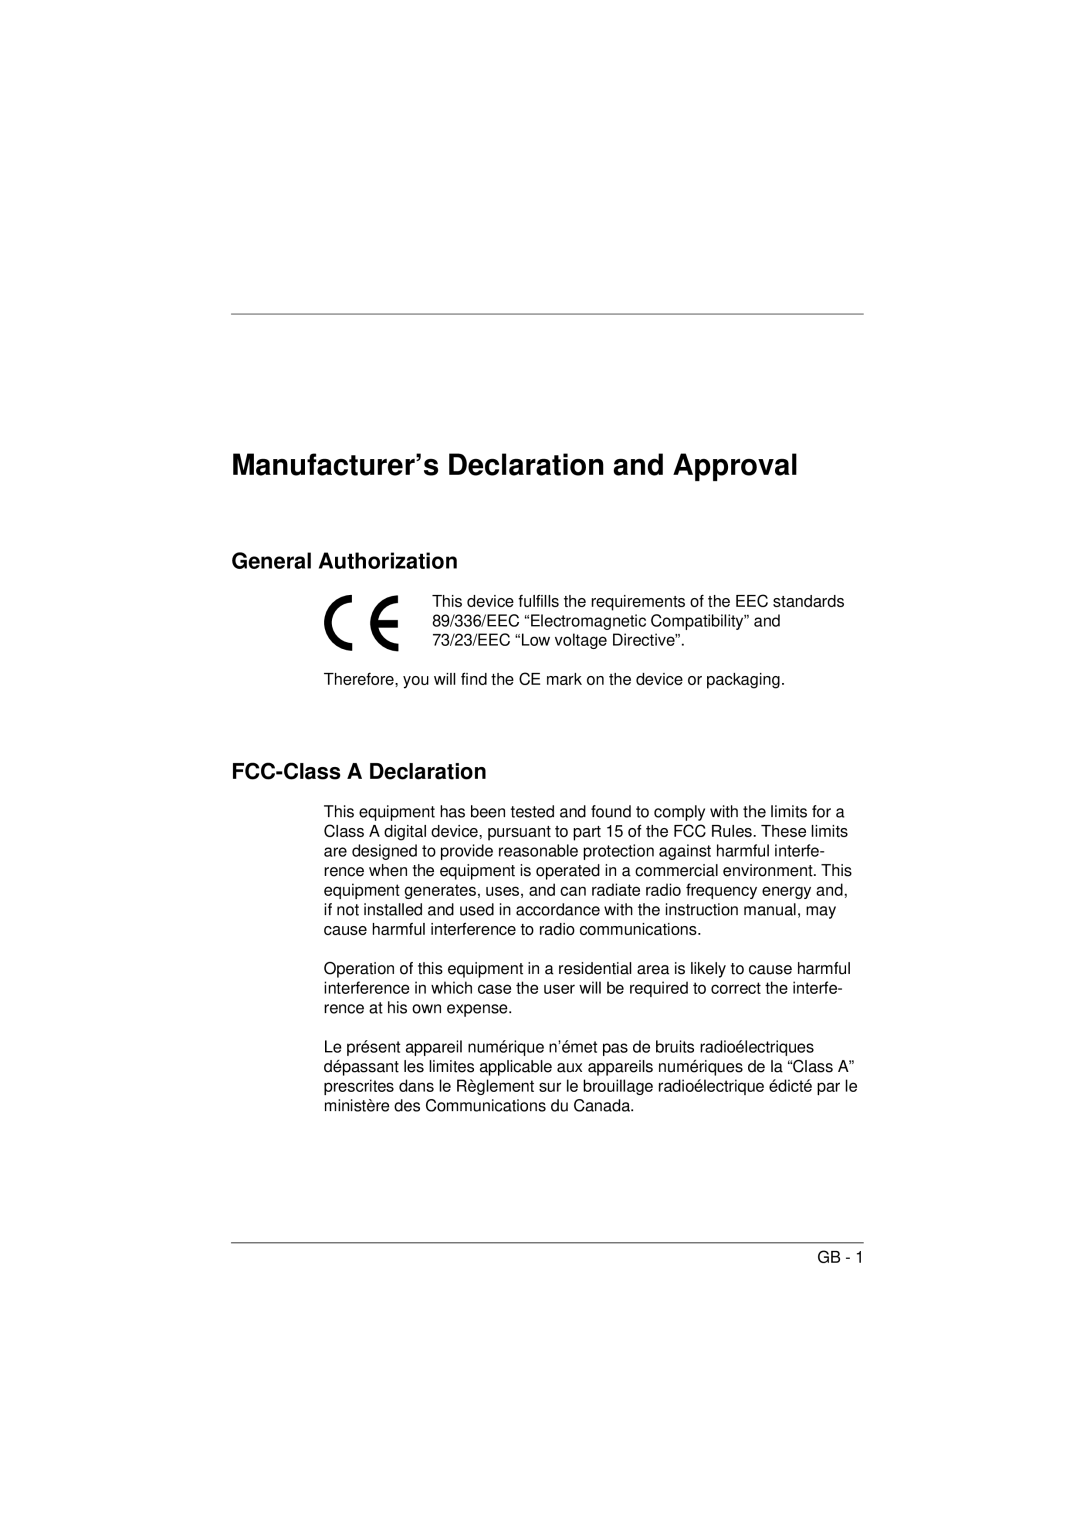 Microsoft TA61 manual Manufacturer’s Declaration and Approval, General Authorization, FCC-Class A Declaration 